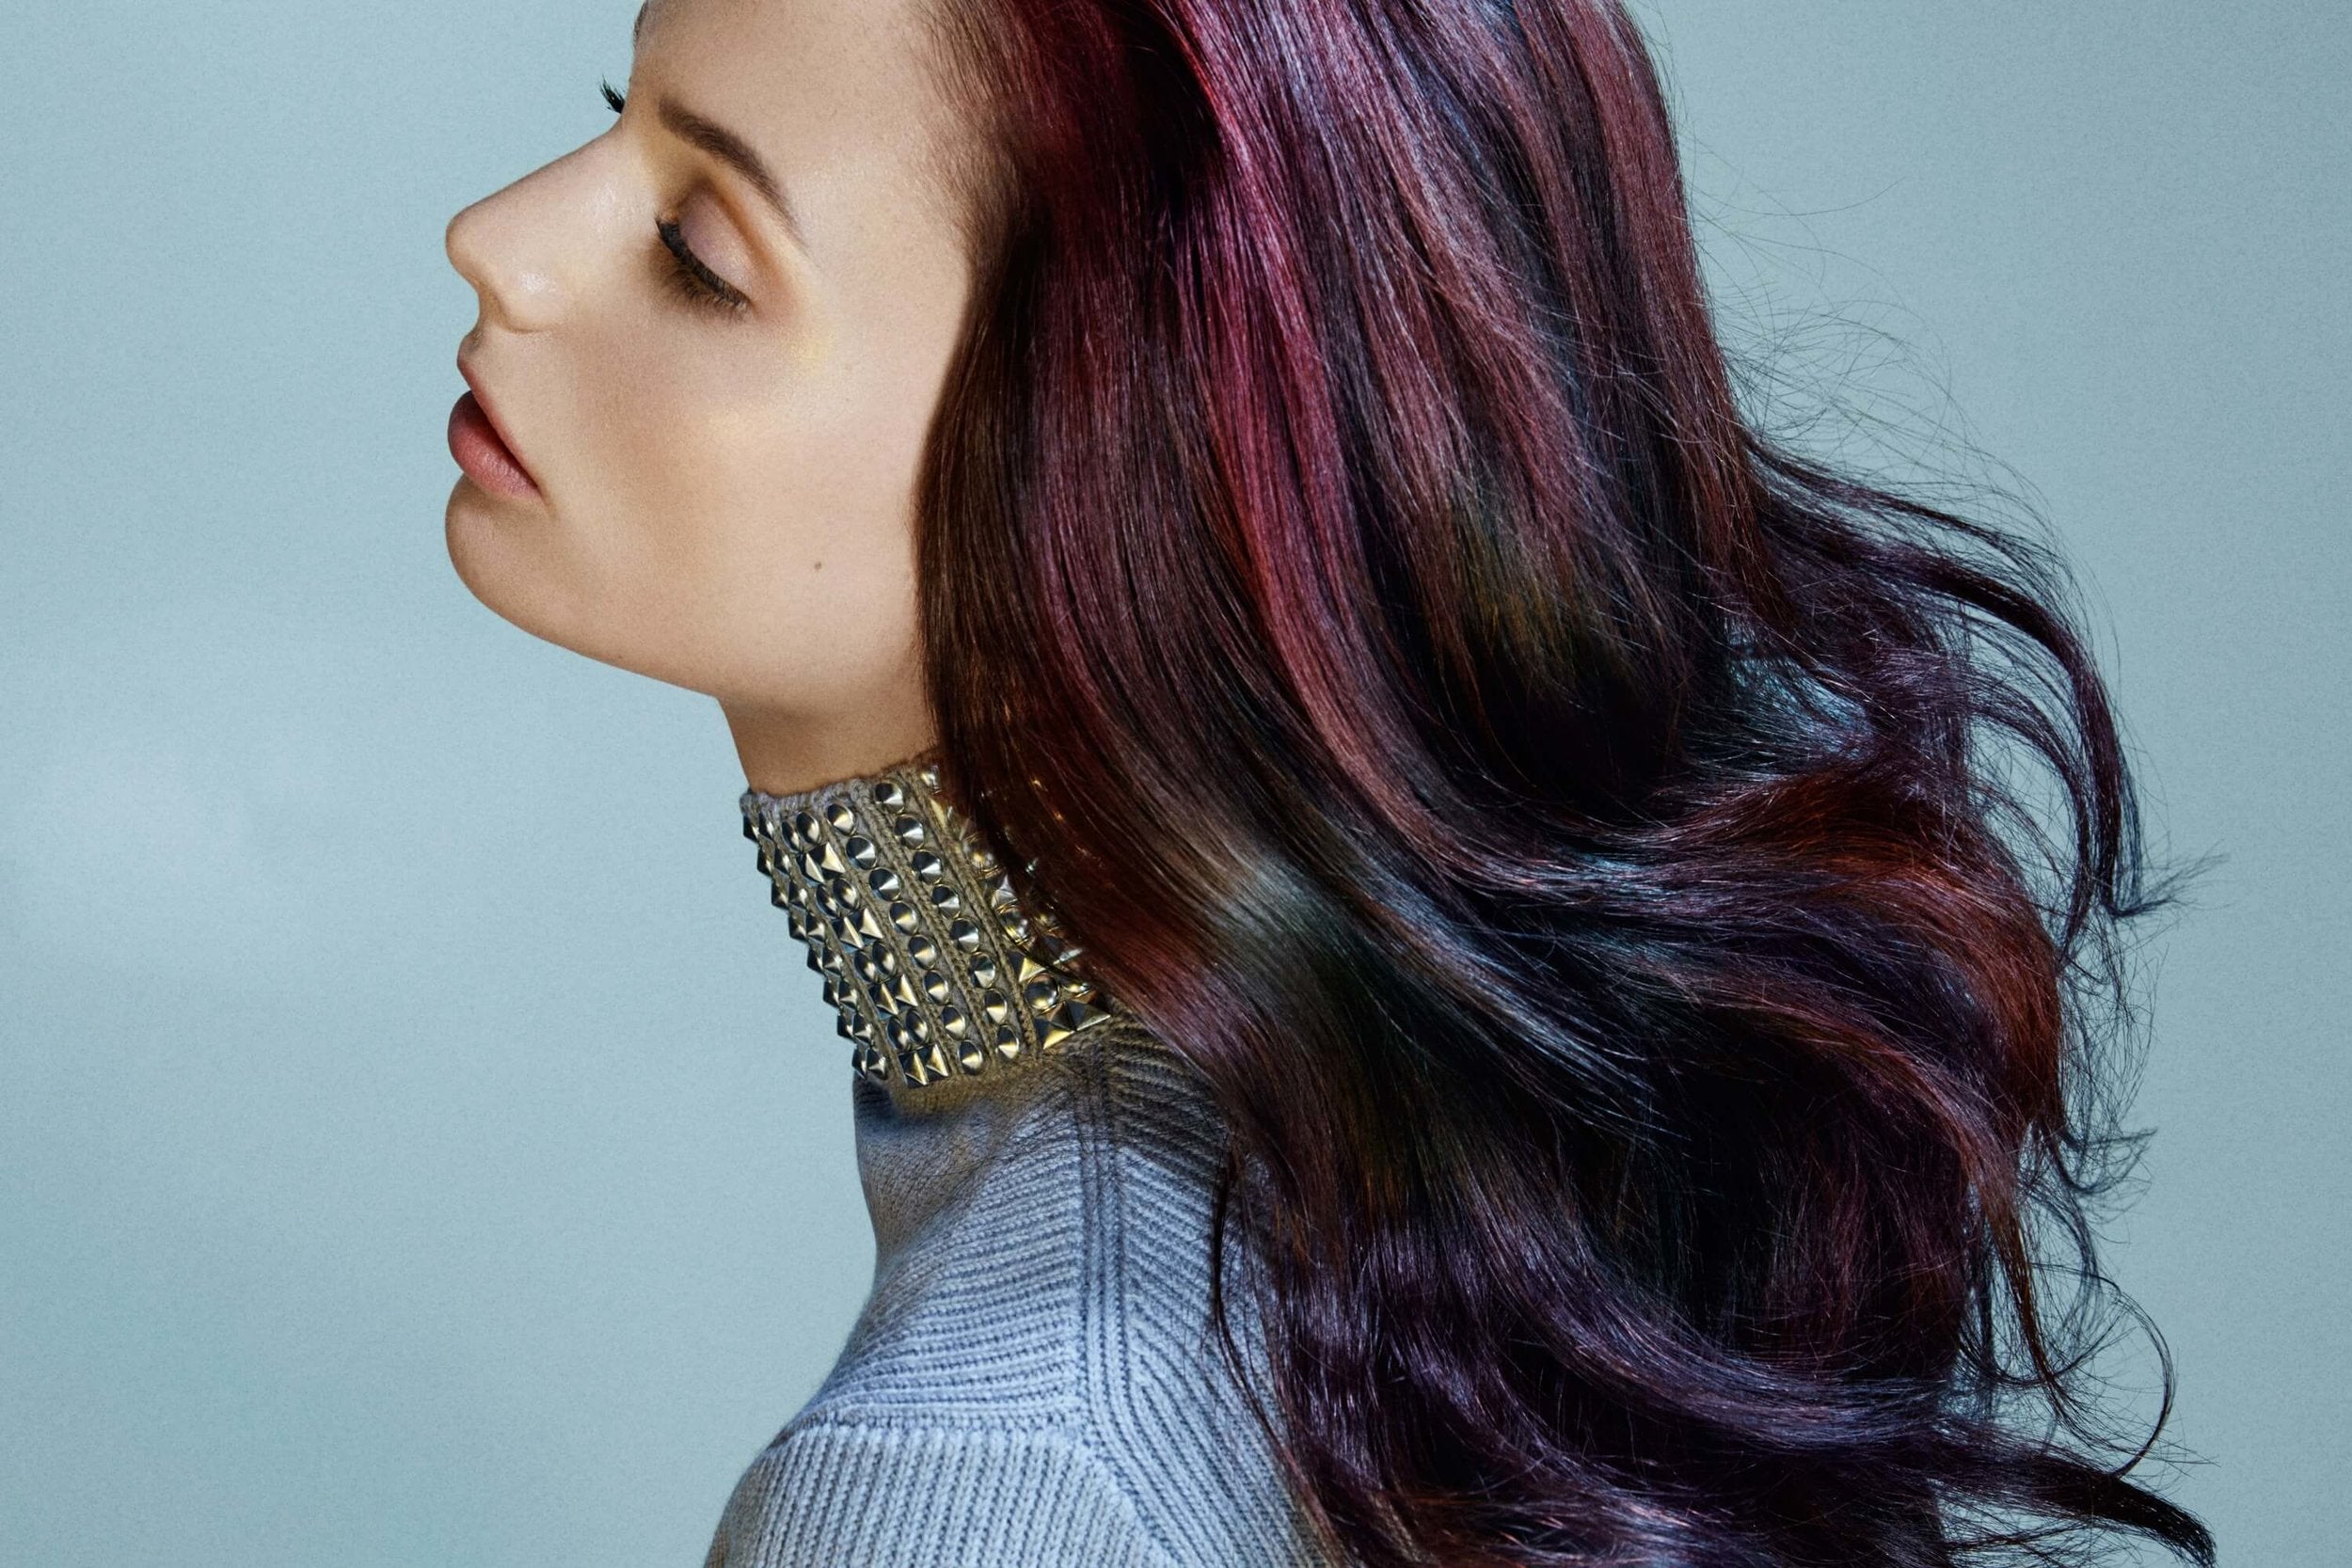 Oil Slick Hair Is The Perfect Hair Color Trend For Brunettes – I AM & CO